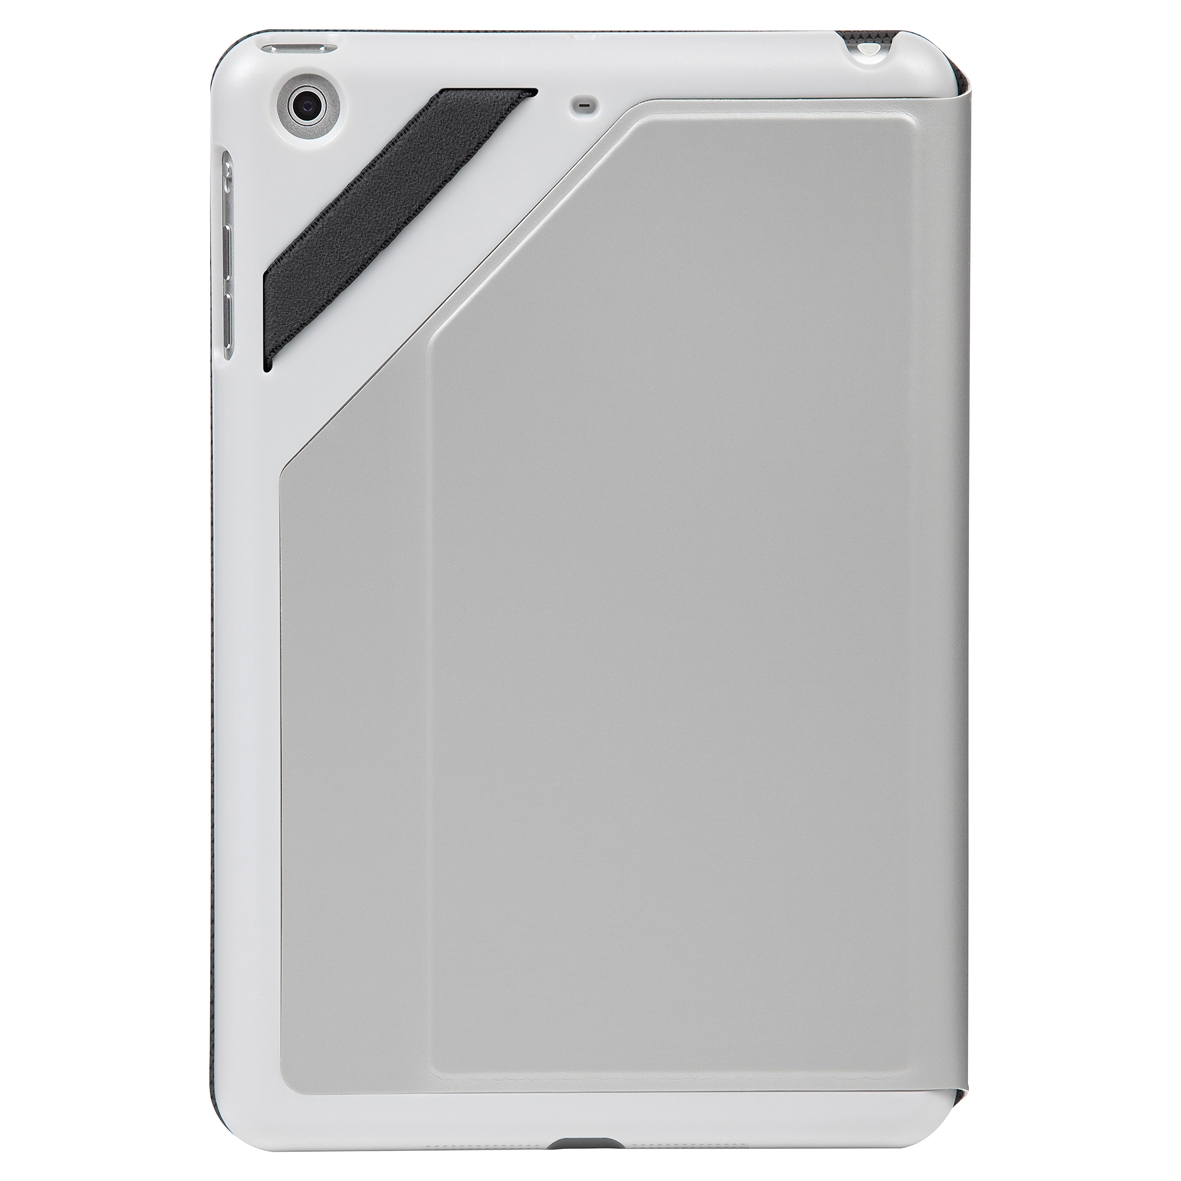 Targus case for ipad mini with retina display horn rimmed glasses